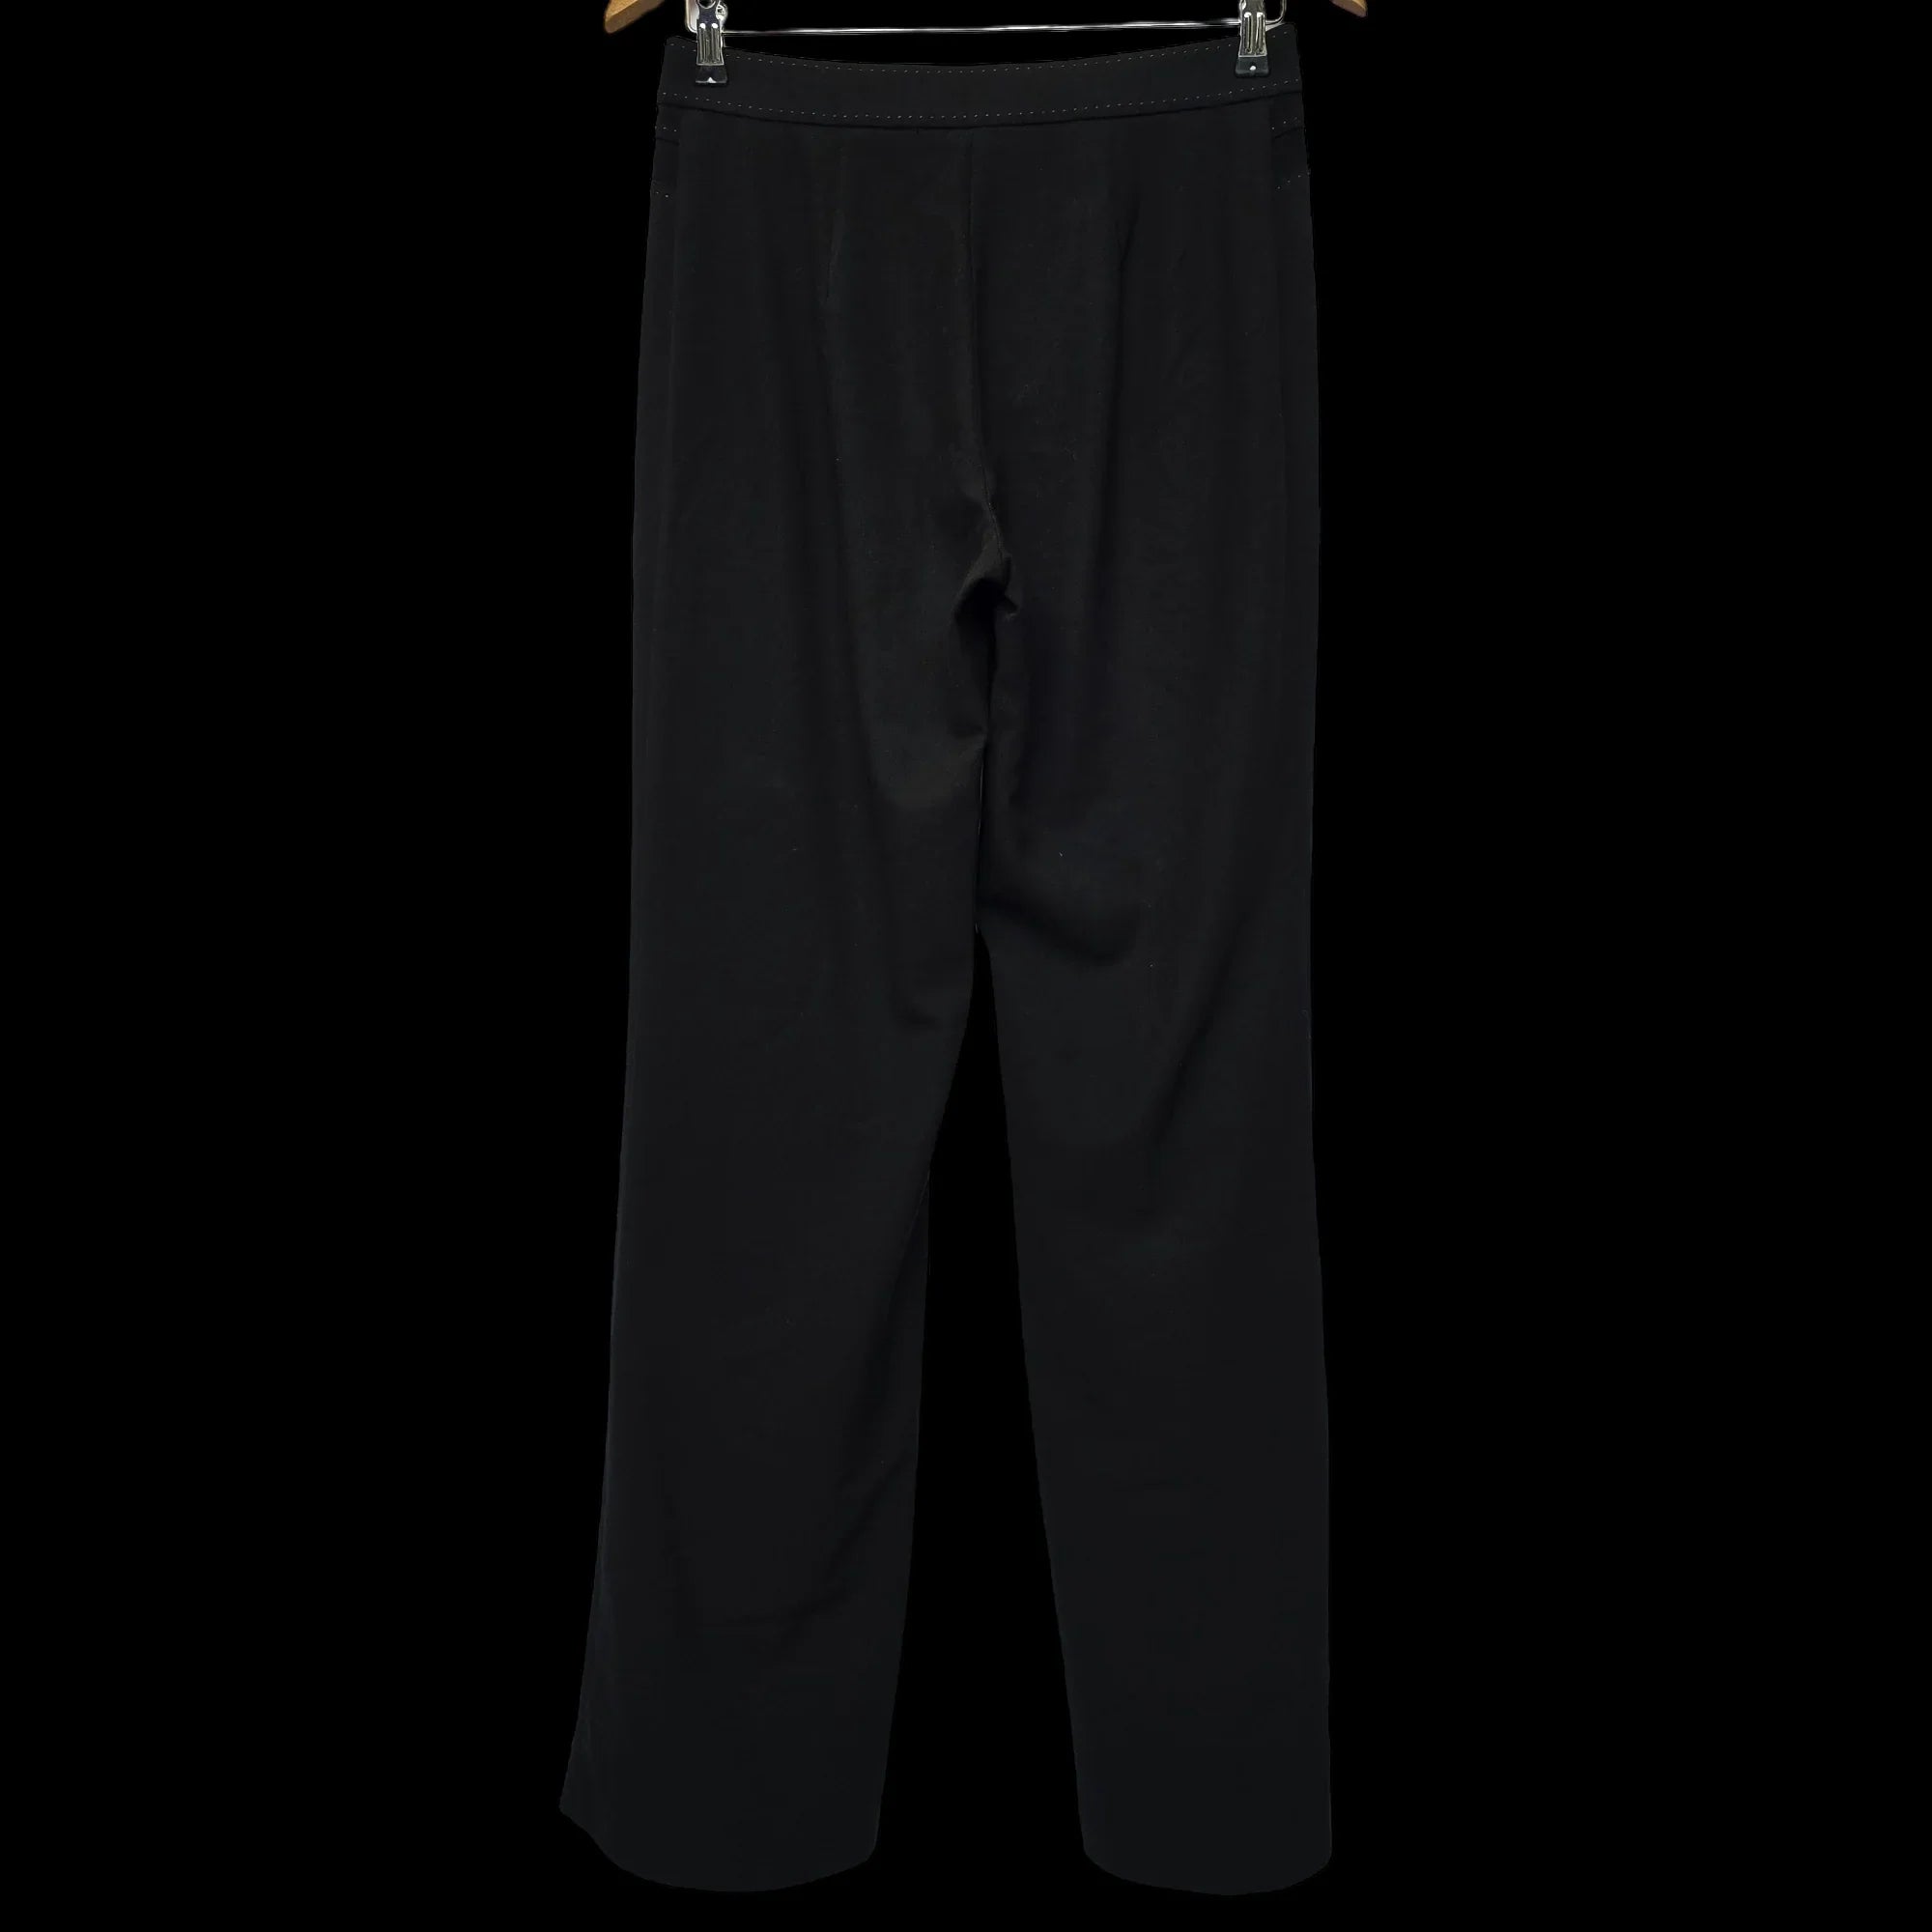 Womens Marks And Spencer Black Trousers UK 10 - & - 2 - 3597